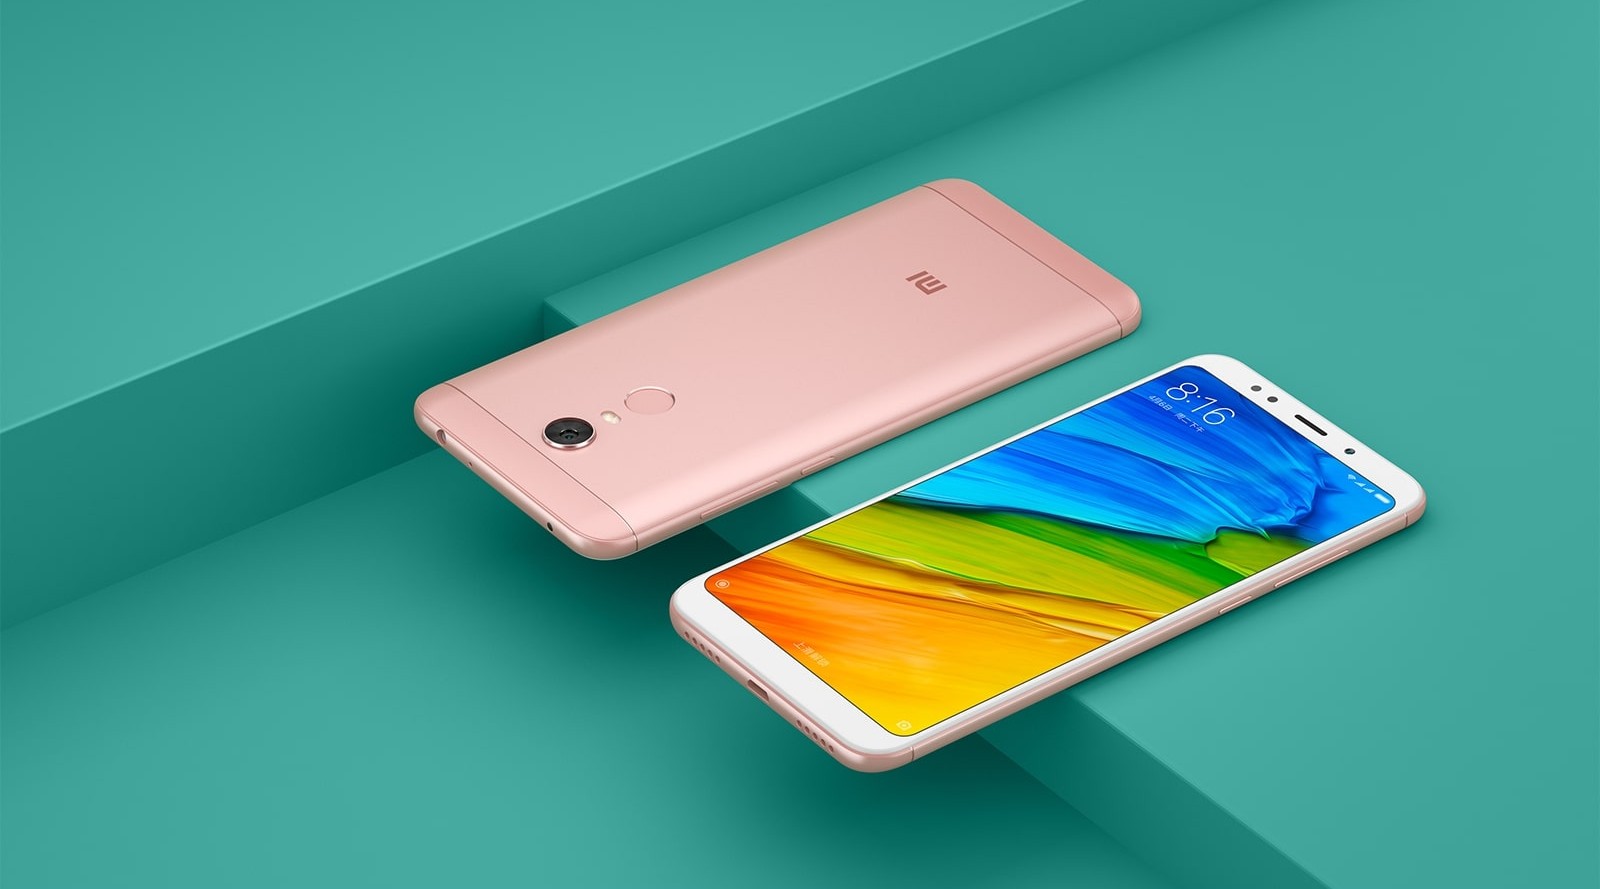 Download and Install Lineage OS 17.1 for Redmi 5 Plus based on Android 10 Q